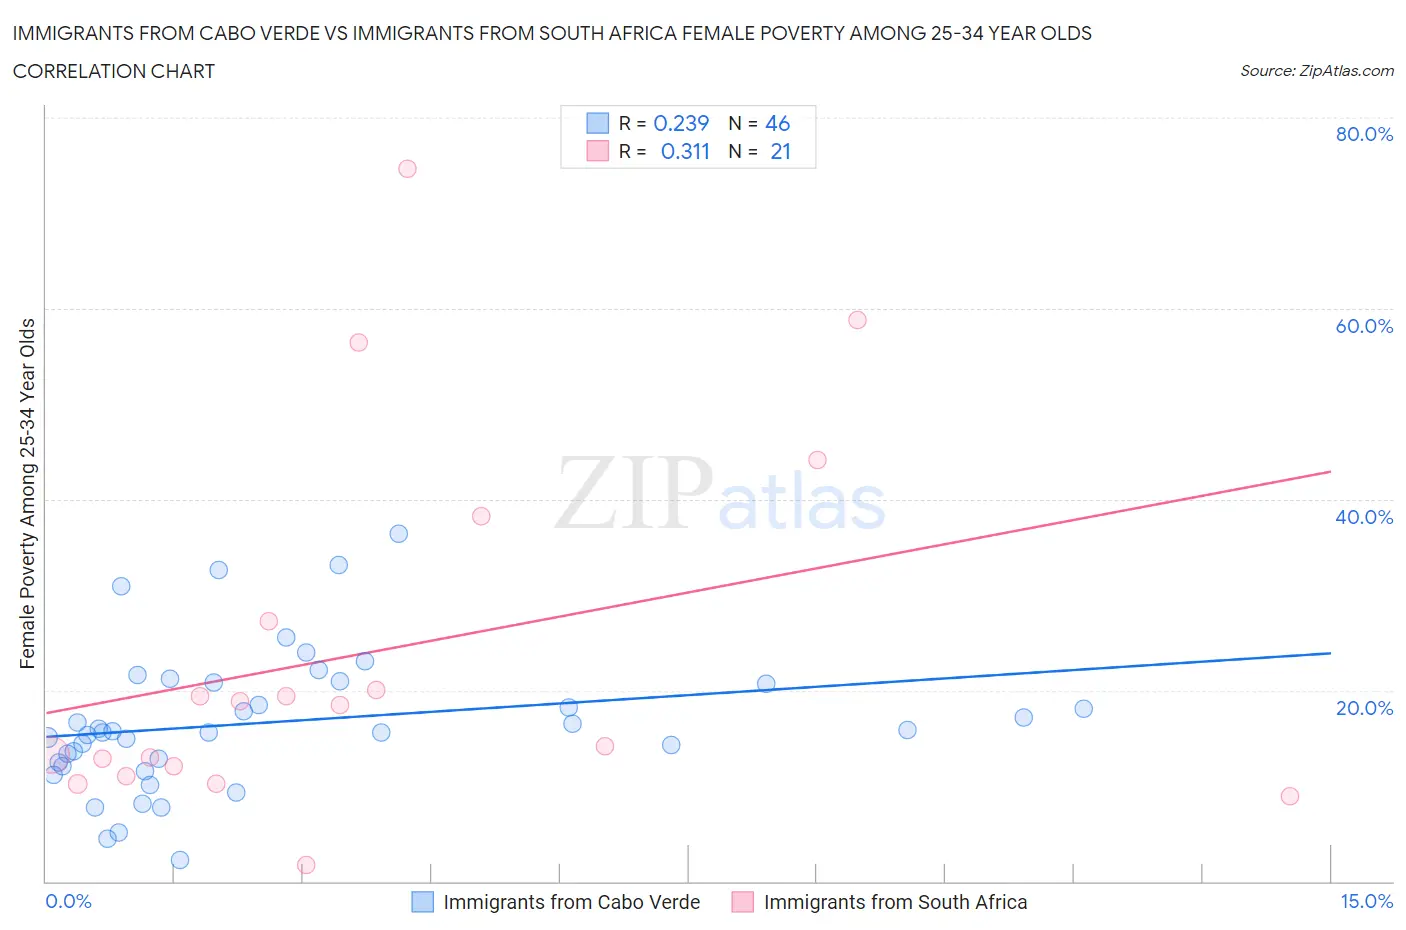 Immigrants from Cabo Verde vs Immigrants from South Africa Female Poverty Among 25-34 Year Olds